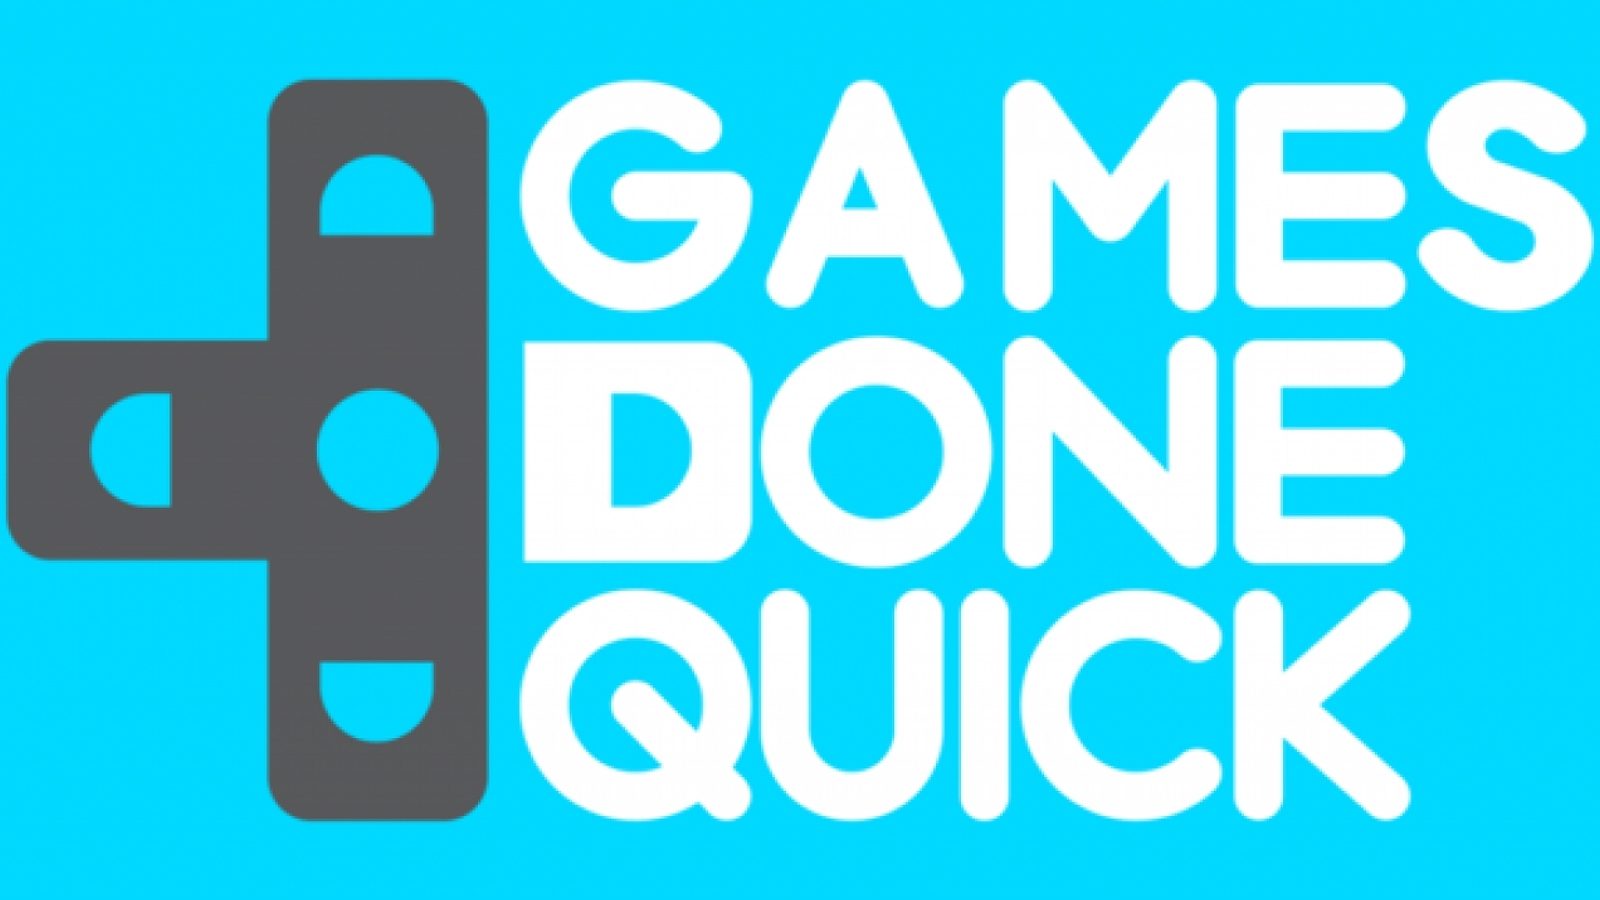 AGDQ 2020 Kicks Off Today, Raising Money For The Prevent Cancer Foundation